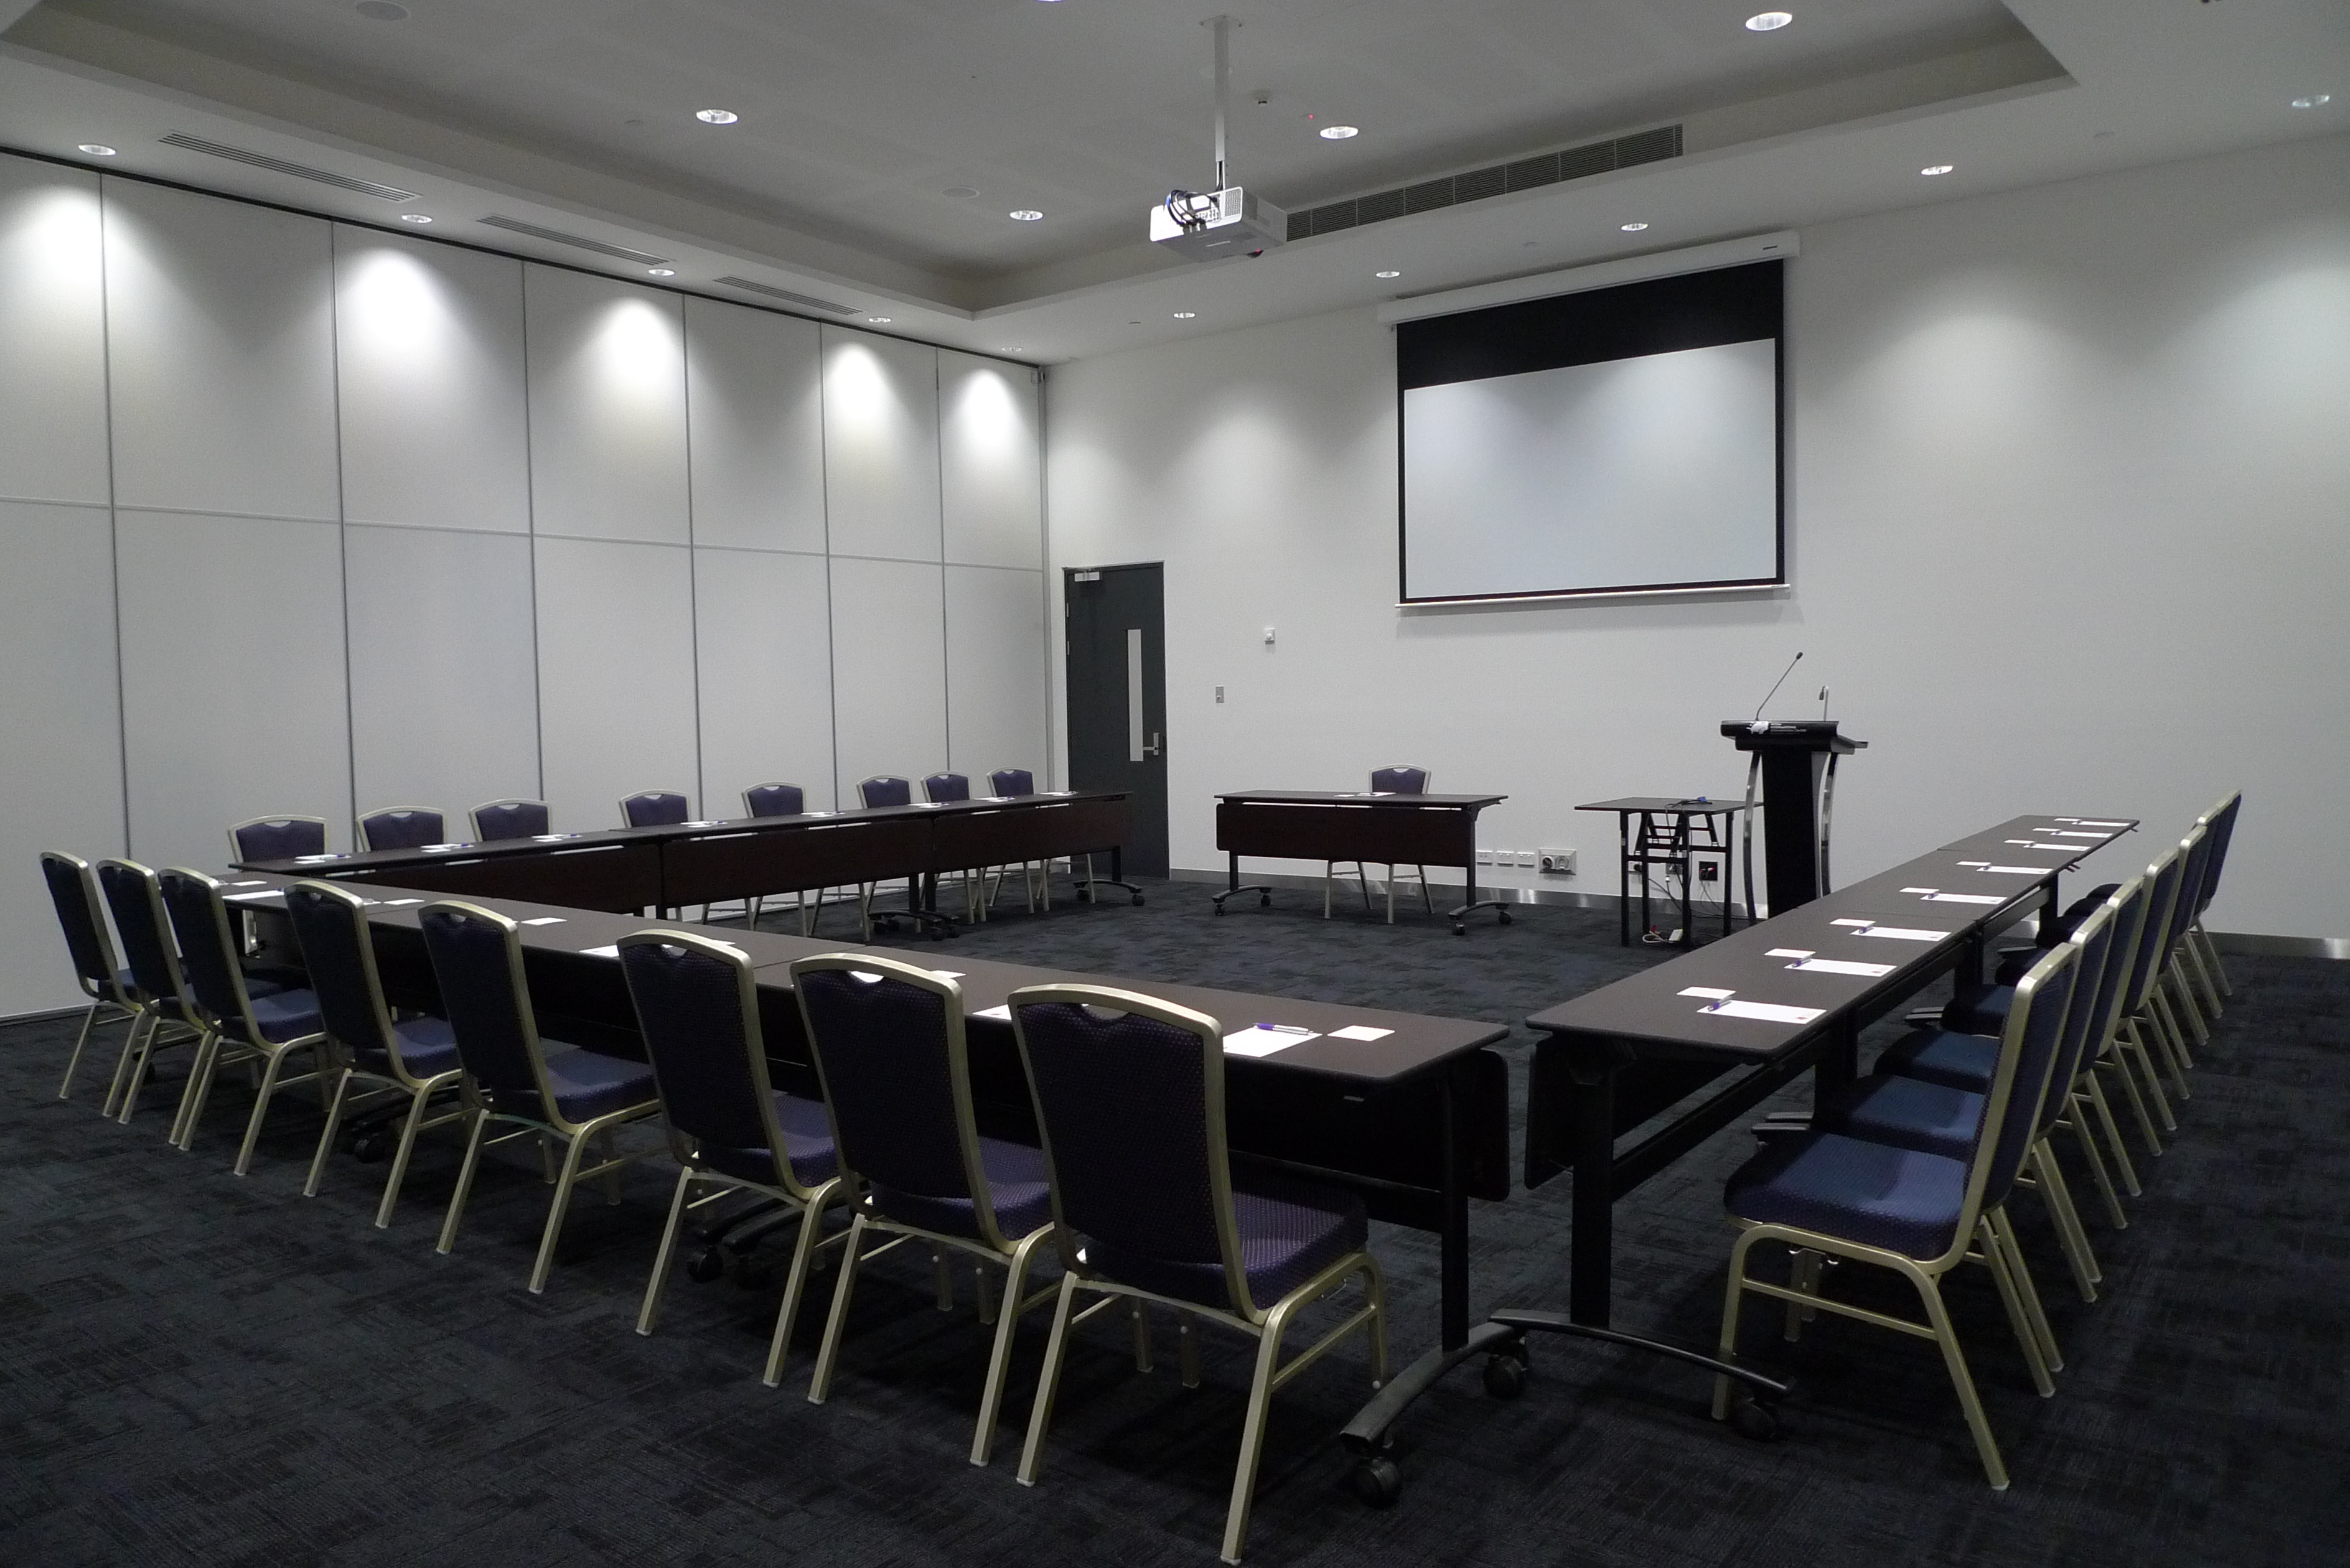 Event Space - 2 Meeting Rooms Combined